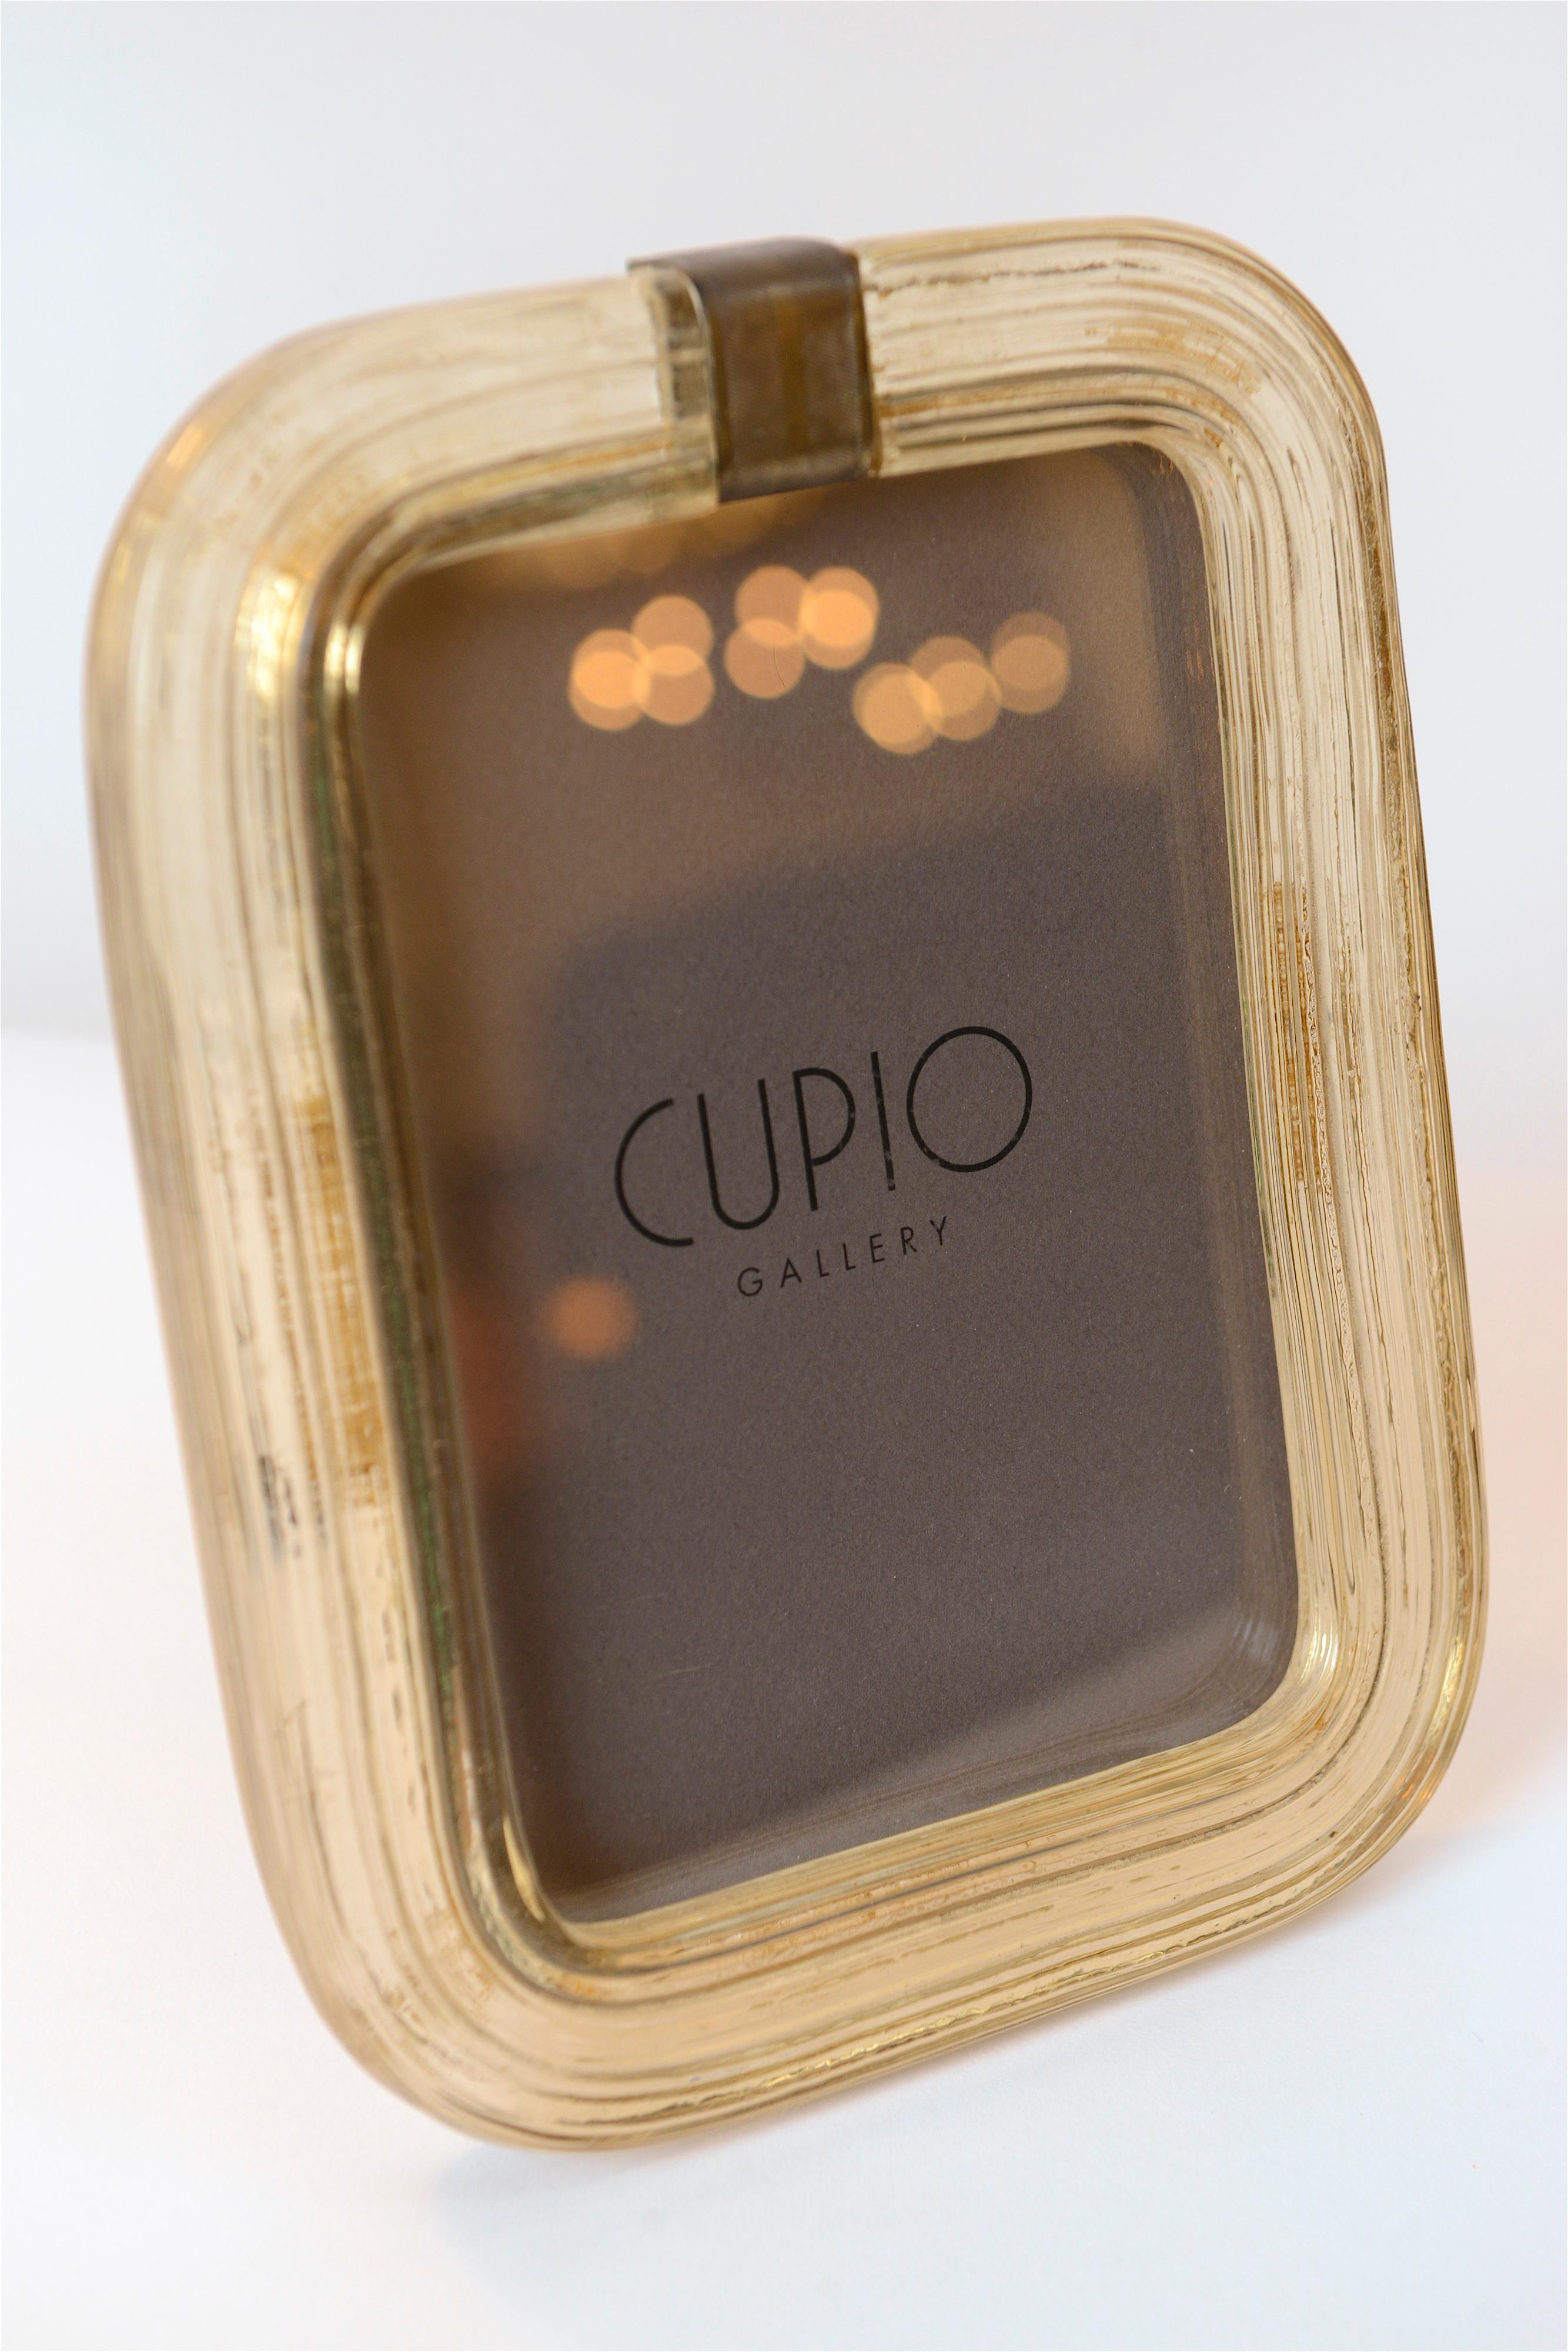 A particularly beautiful 1940s picture frame designed by Italian architect and designer Carlo Scarpa. Produced by the prestigious Muranese Company, Venini, this honey colored piece was made using the ‘Battuto’ glass making technique. Deep vertical